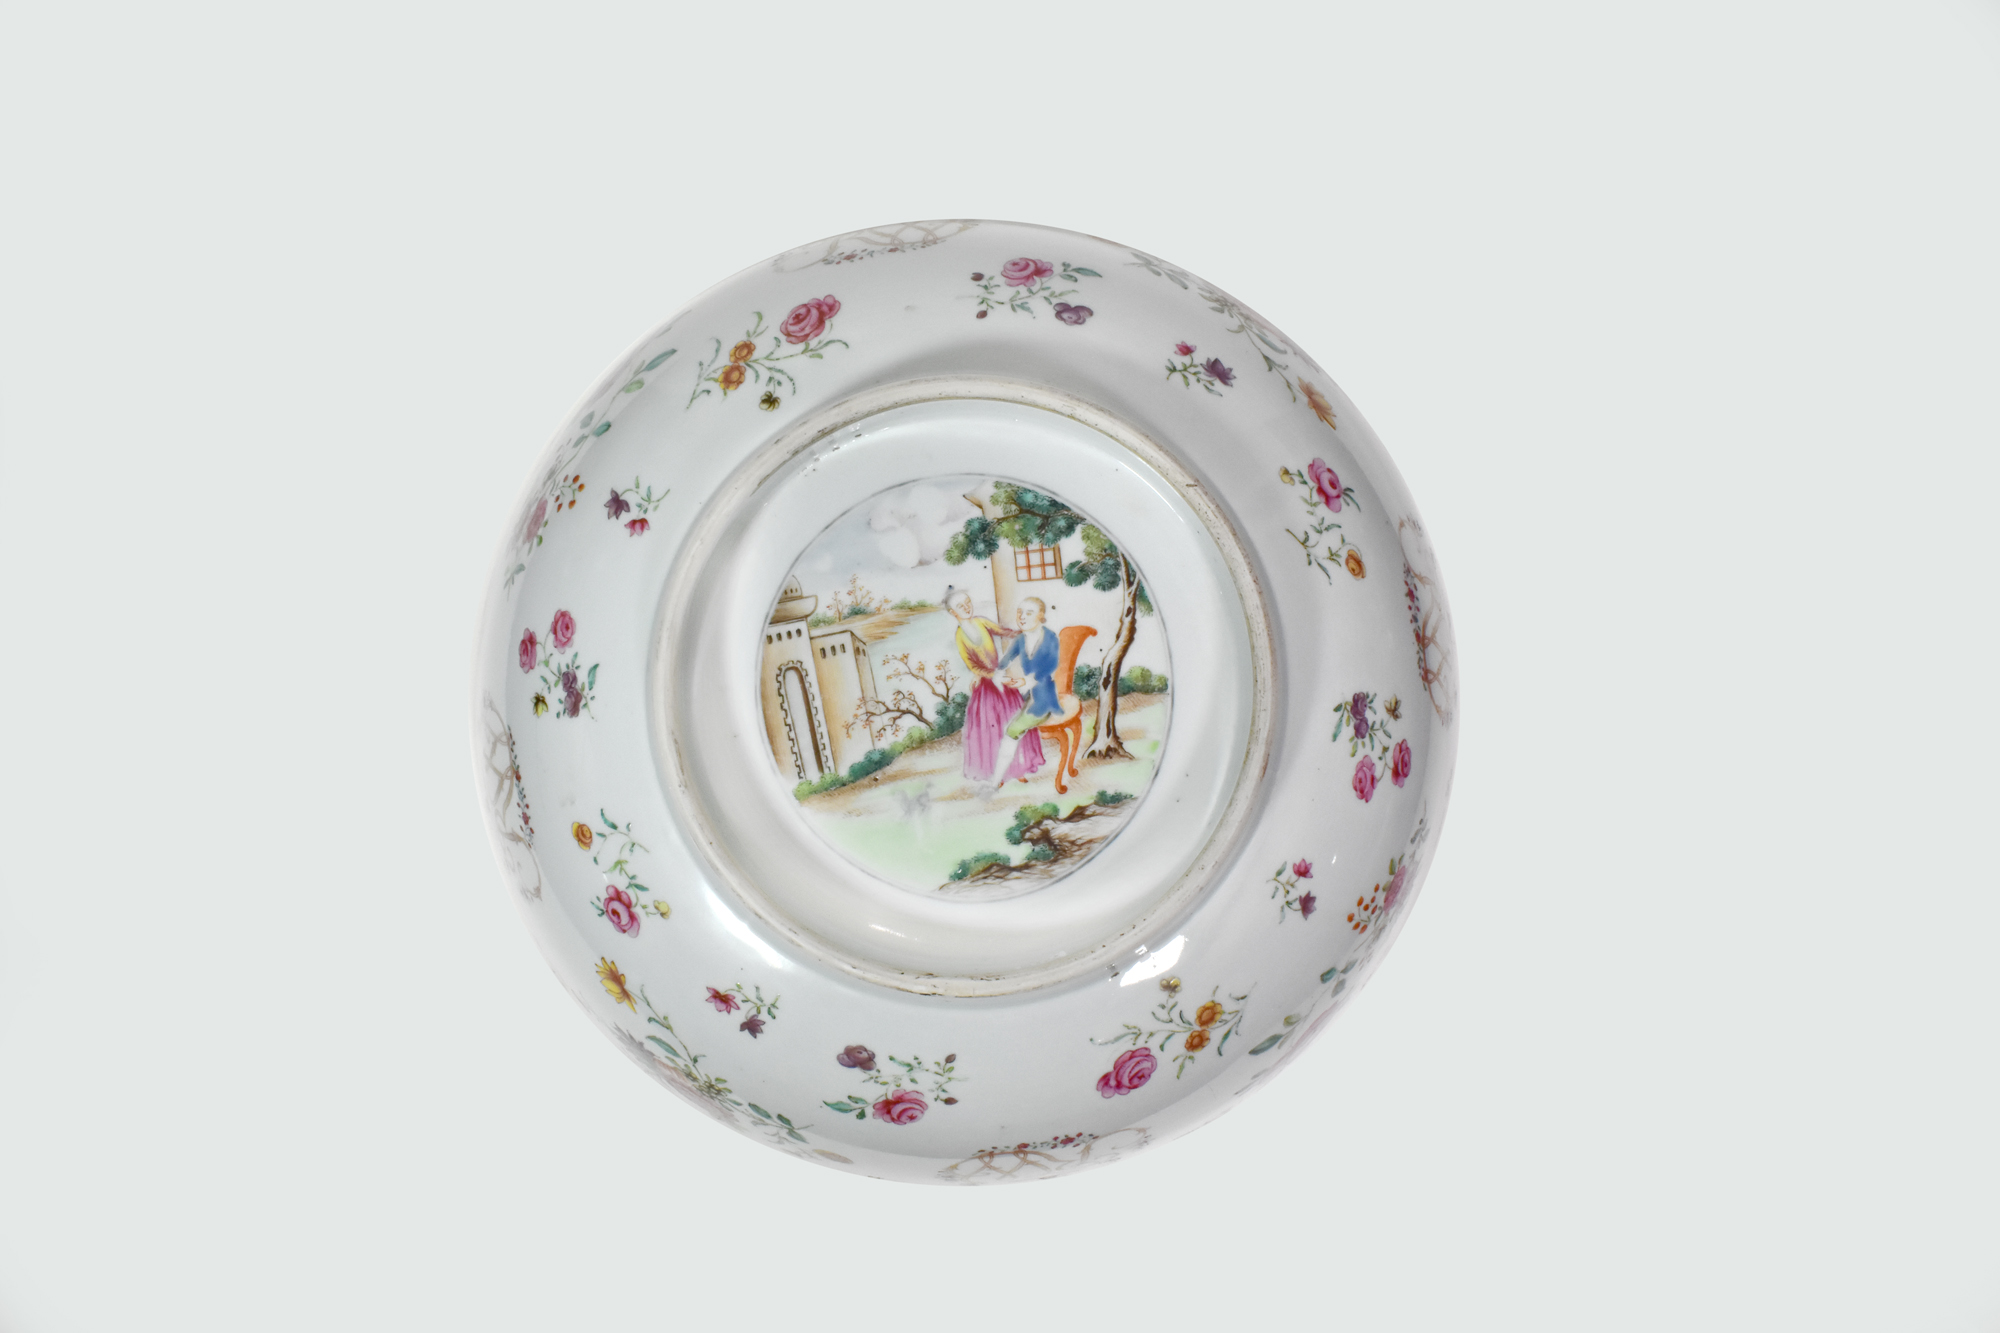 A LARGE CHINESE EXPORT ‘FAMILLE-ROSE’ ‘EUROPEAN SUBJECT’ PUNCHBOWL, QIANLONG PERIOD 1736 – 1795 - Image 2 of 6